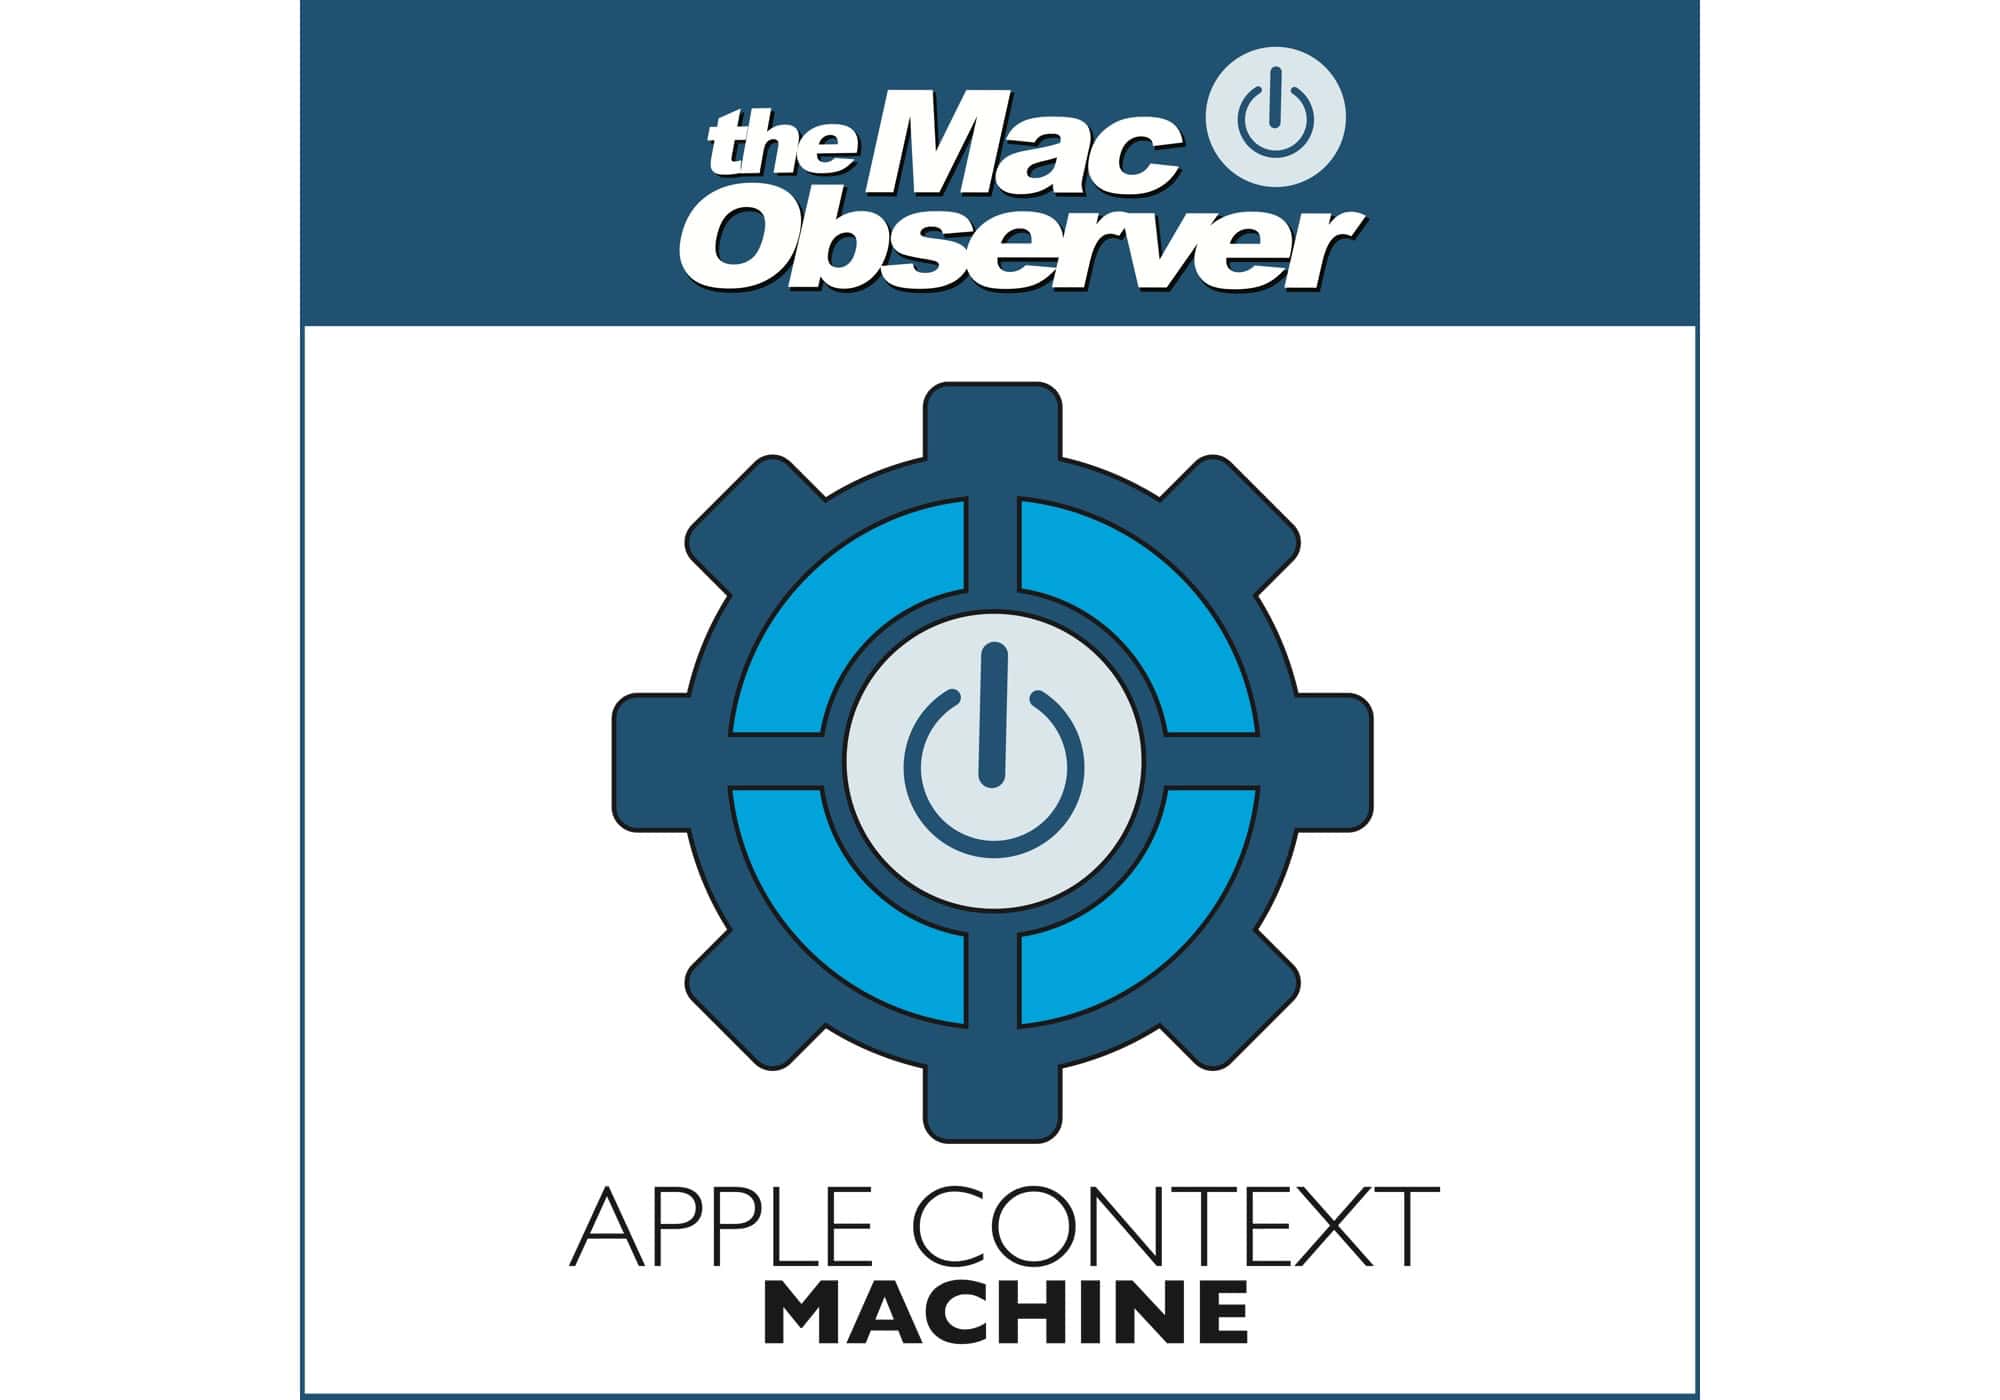 ACM 376: Deep Dive into iPhone 7, Apple Watch Series 2